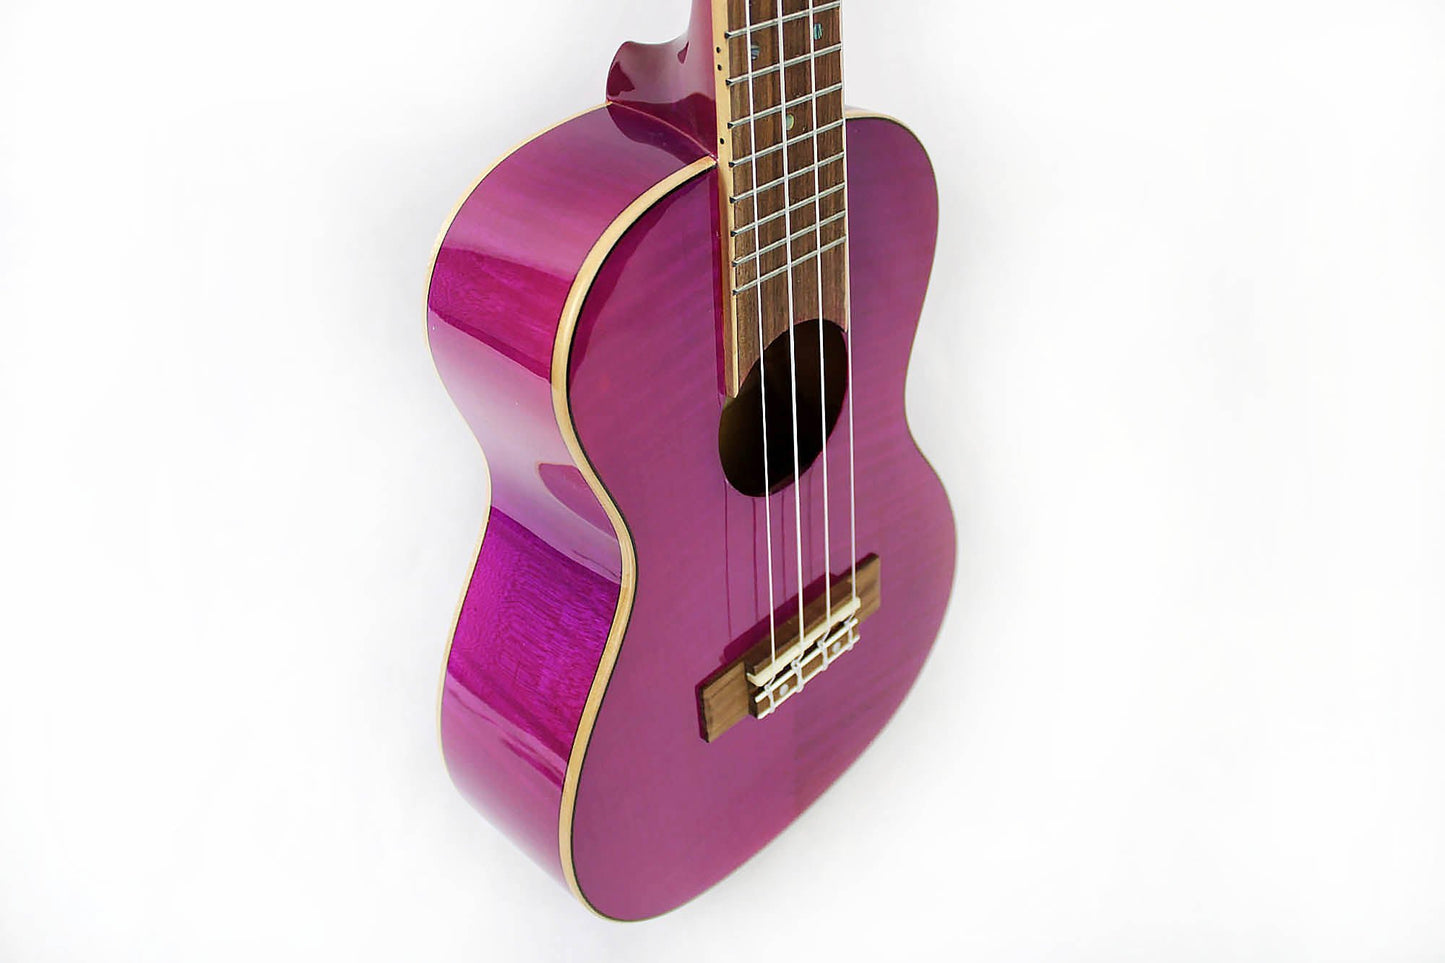 This is the front side view of the body and neck of an Amahi PGUK555PUC Flamed Maple Concert Ukulele- purple.